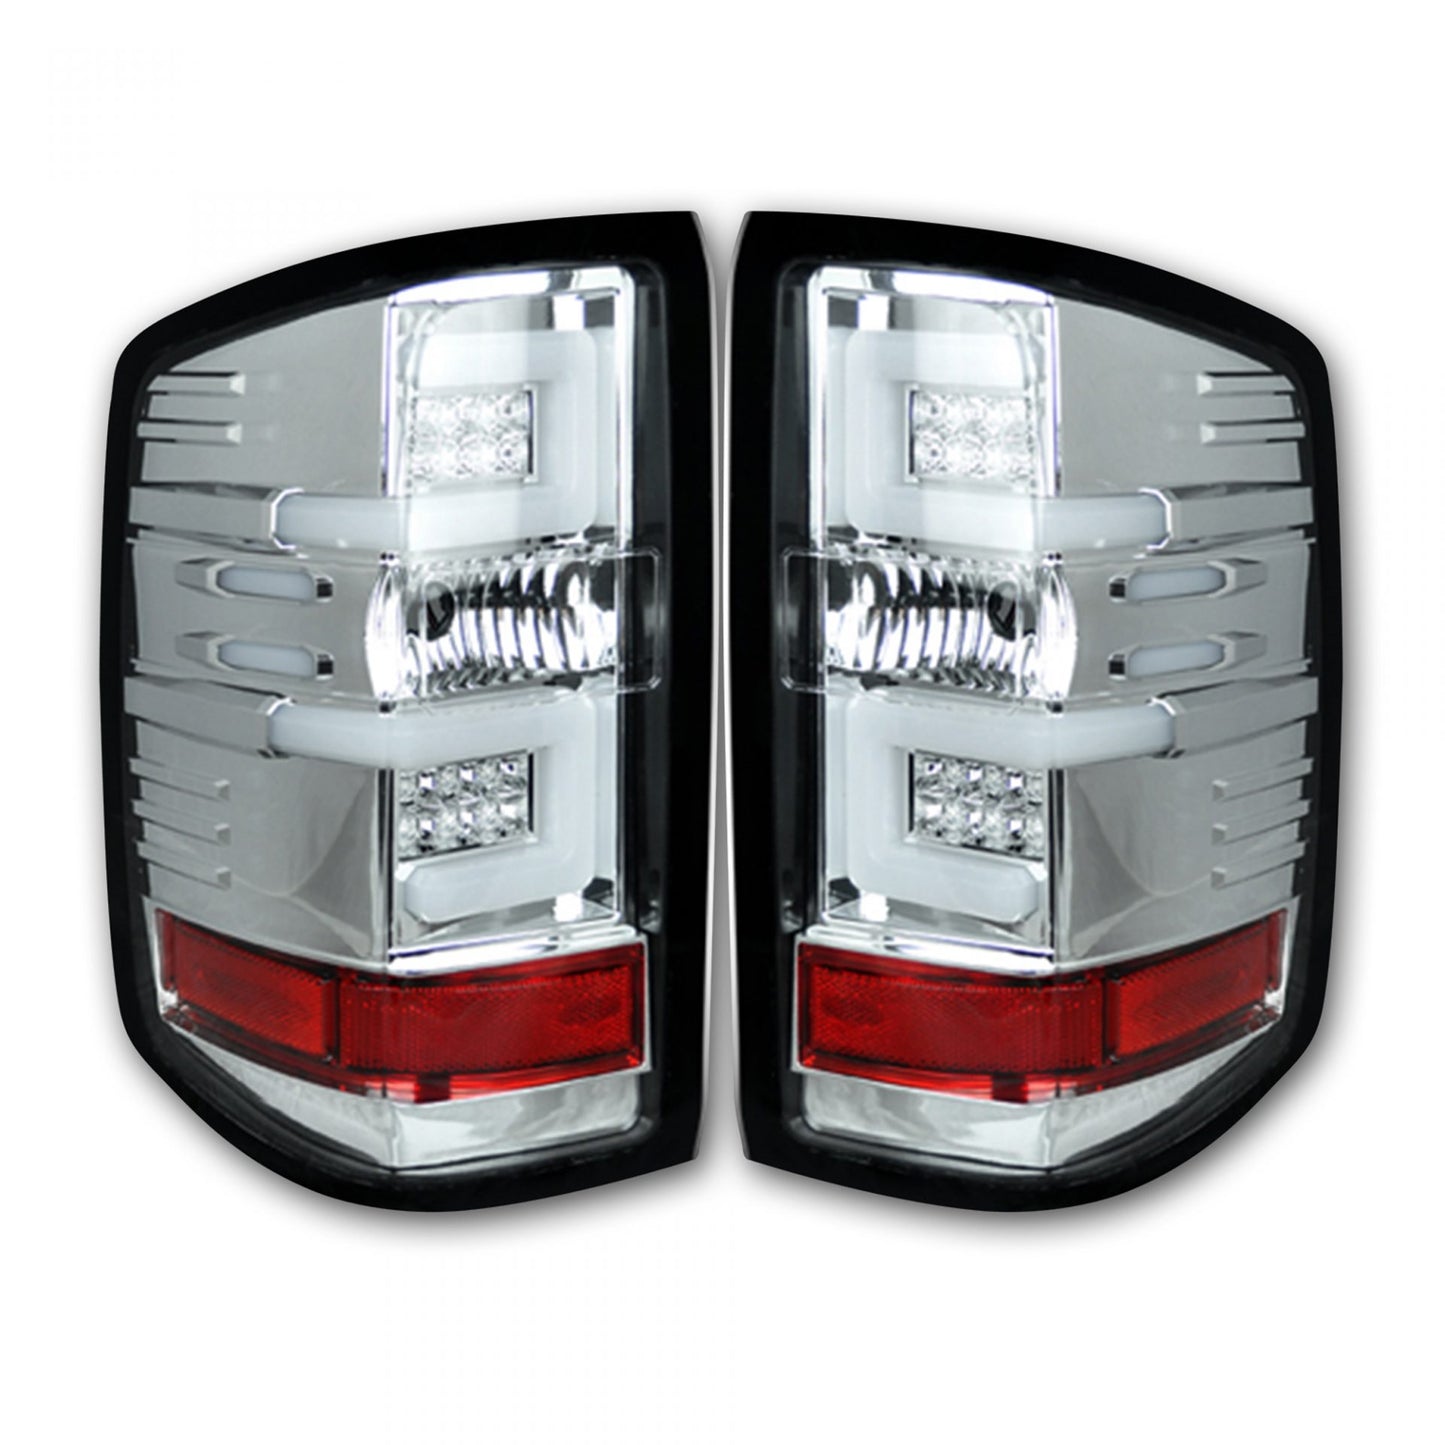 Chevy Silverado 2014-2018 1500 and 2015-2019 2500/3500 (Also fits GMC Sierra 2015-2019 Dually) OLED TAIL LIGHTS